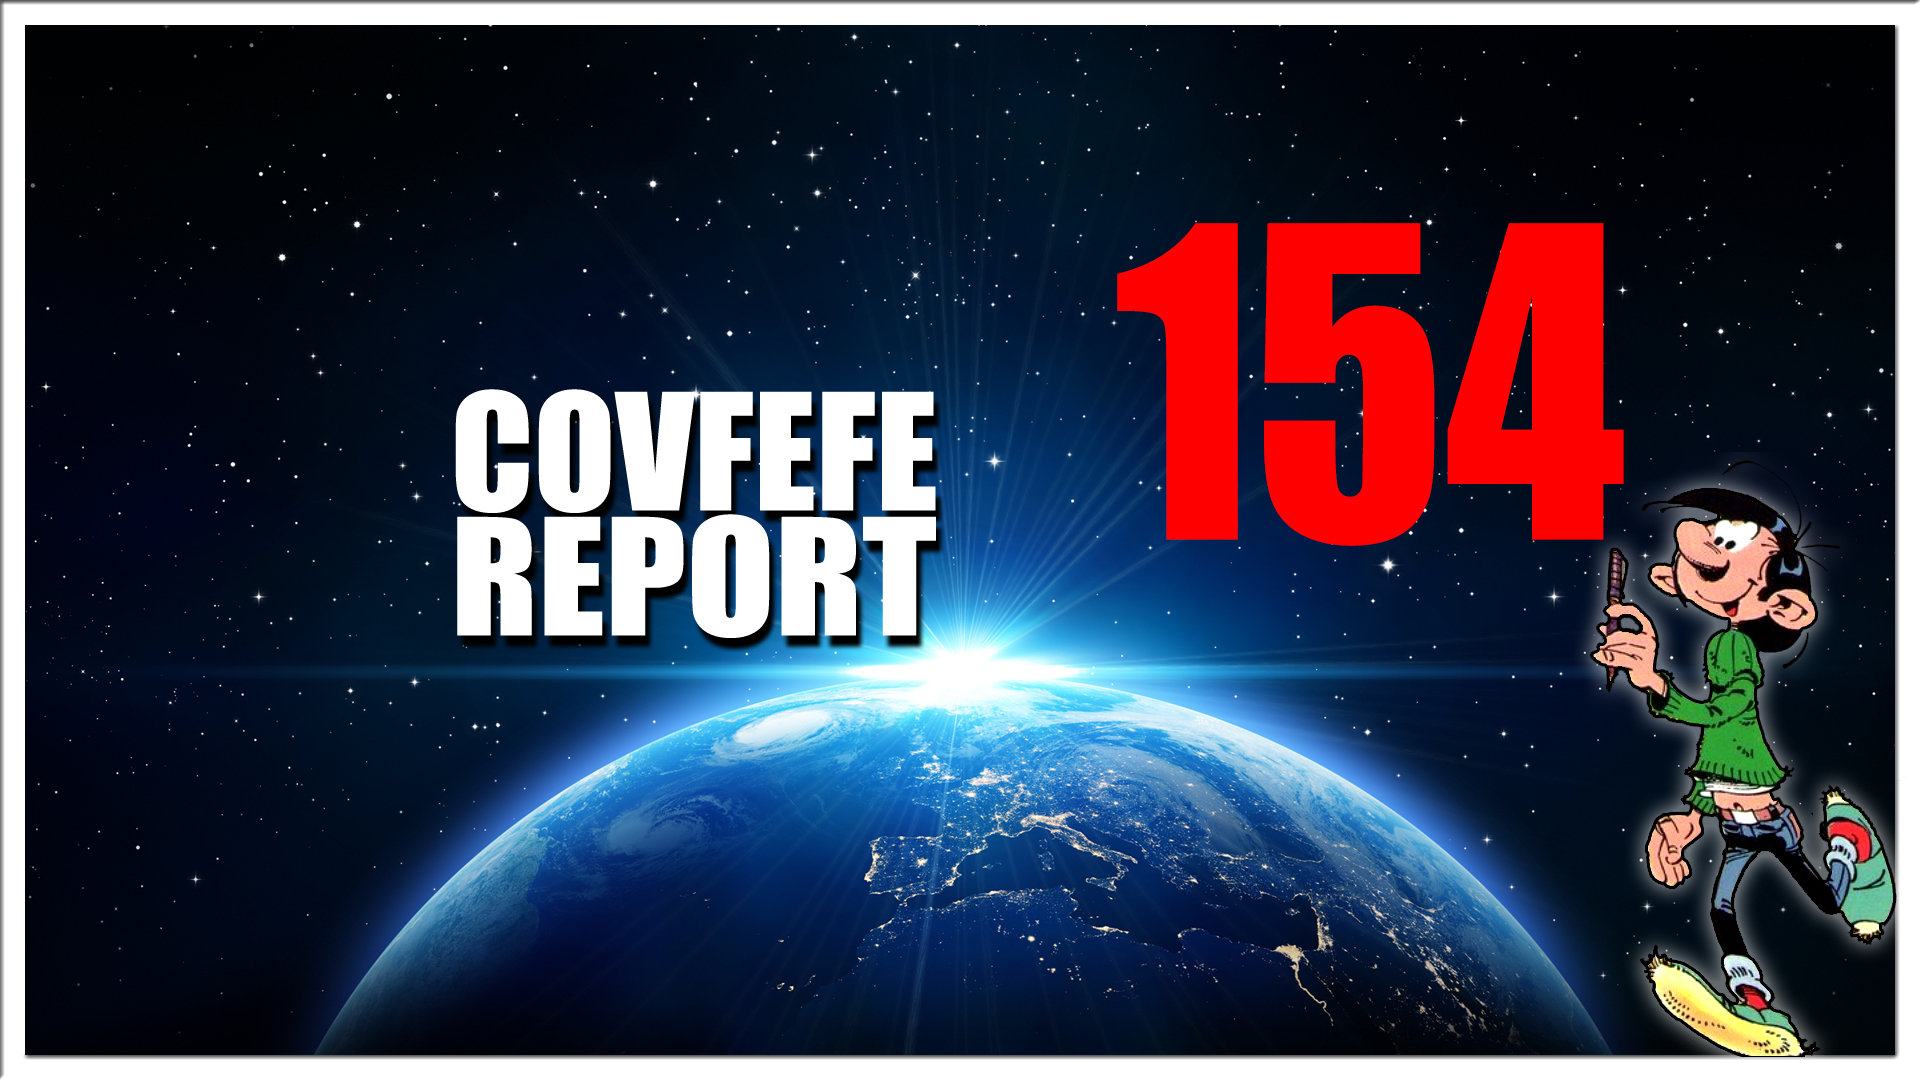 Covfefe Report 154. Henry Kissinger, Codes, HRC, Bill Gates, Amazing Polly, Stephen Bannon, Jack Dorsey